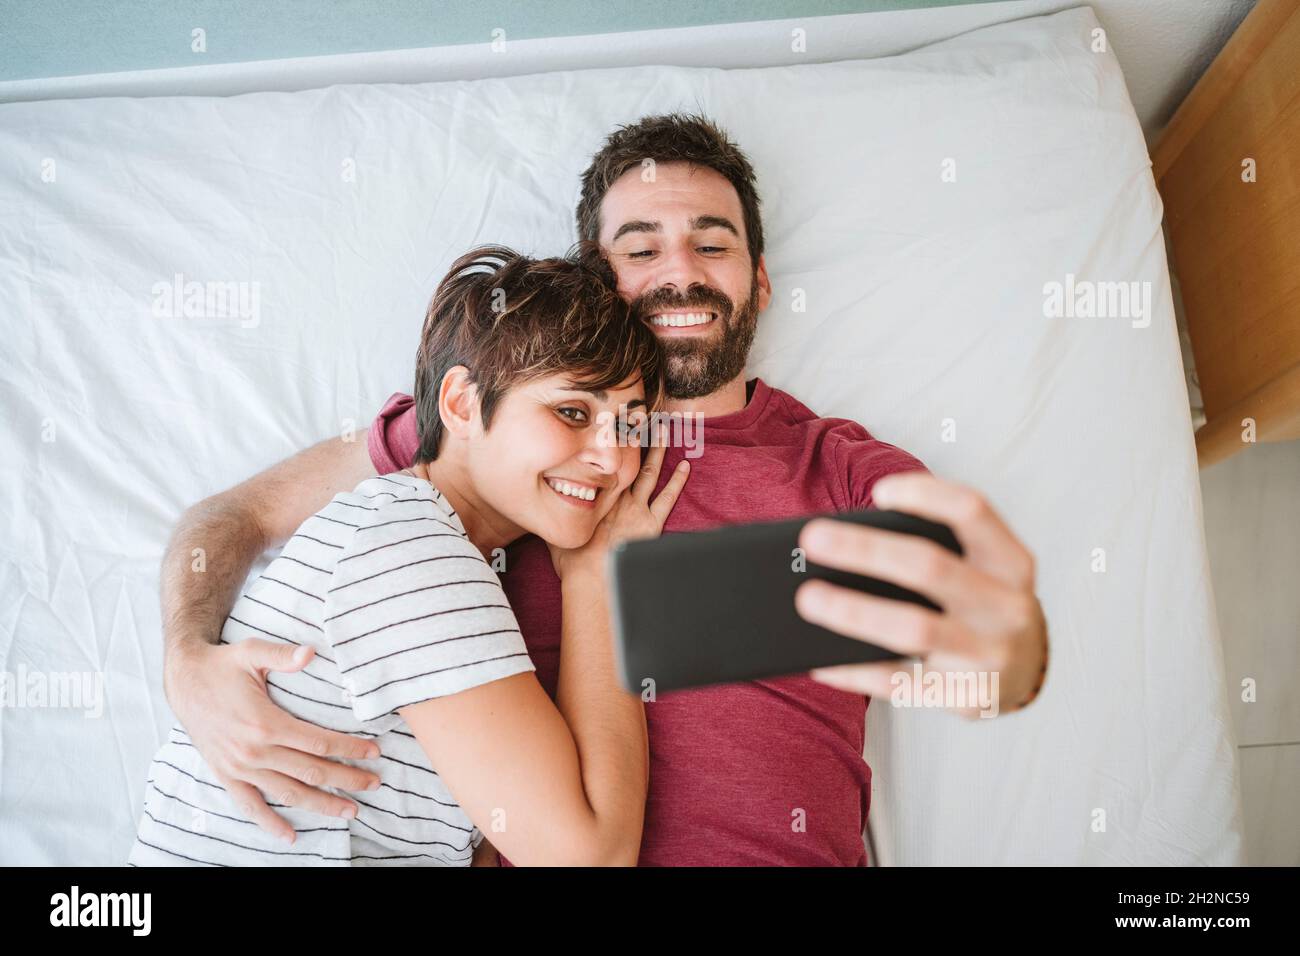 Man with woman taking selfie though smart phone while lying on bed Stock Photo